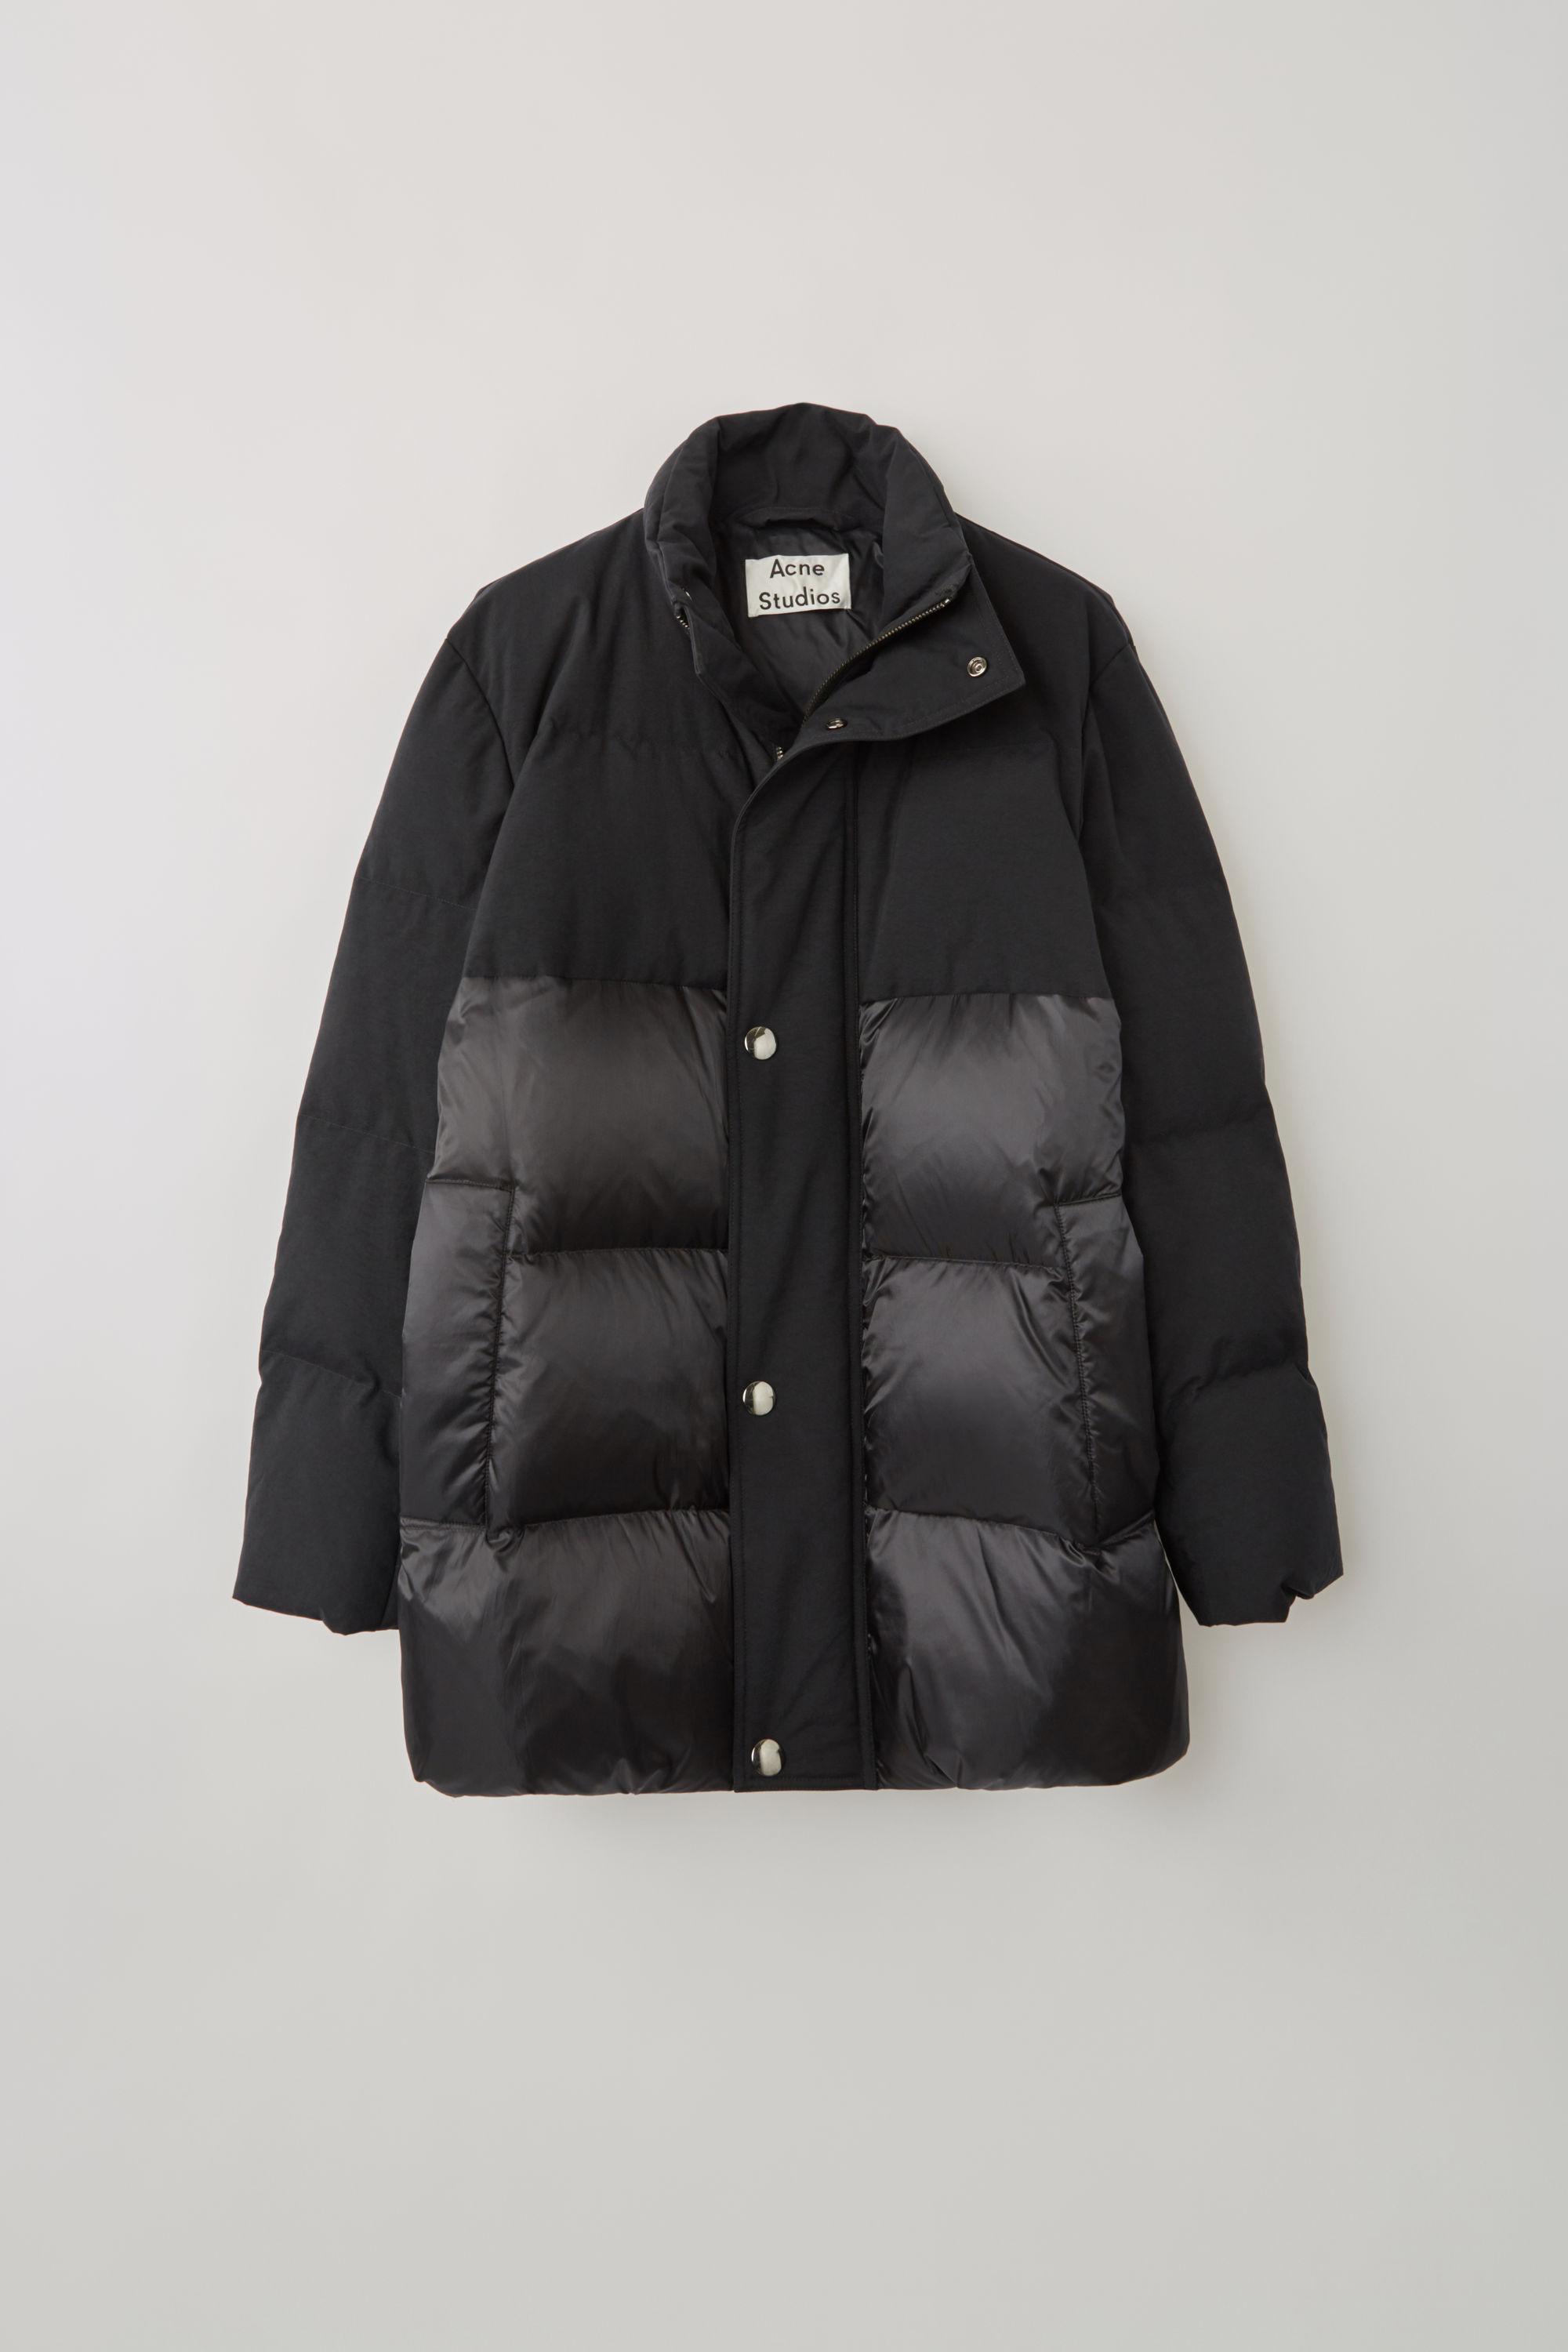 Acne Studios Canvas Fn-mn-outw000153 Black Contrast-panel Padded Coat for  Men - Lyst